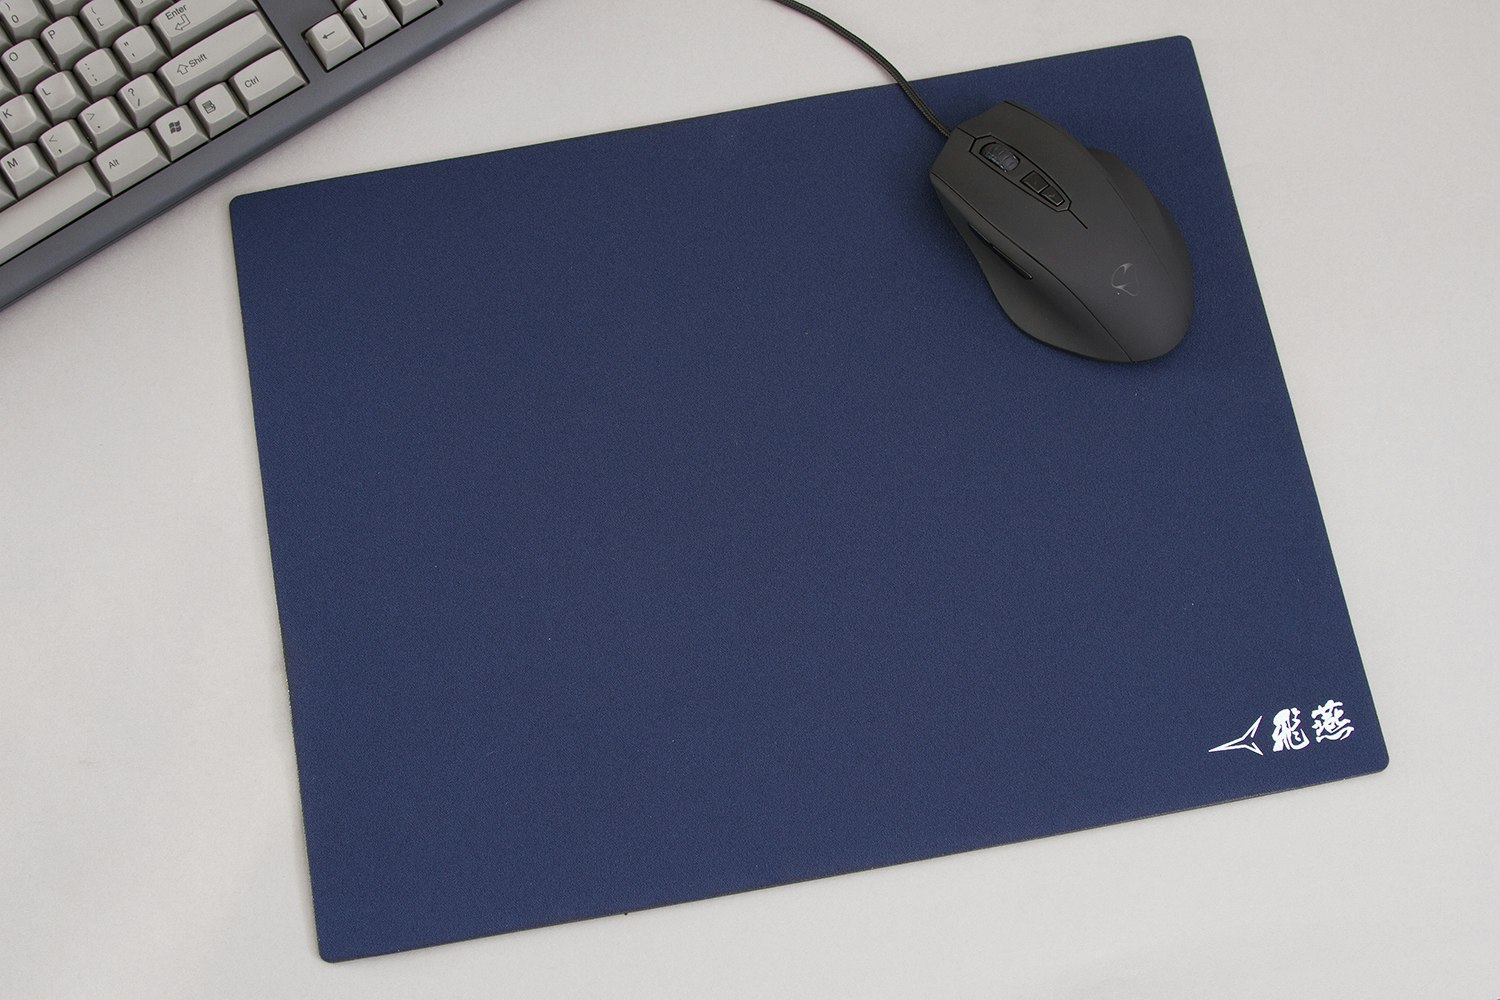 which artisan mousepad to buy